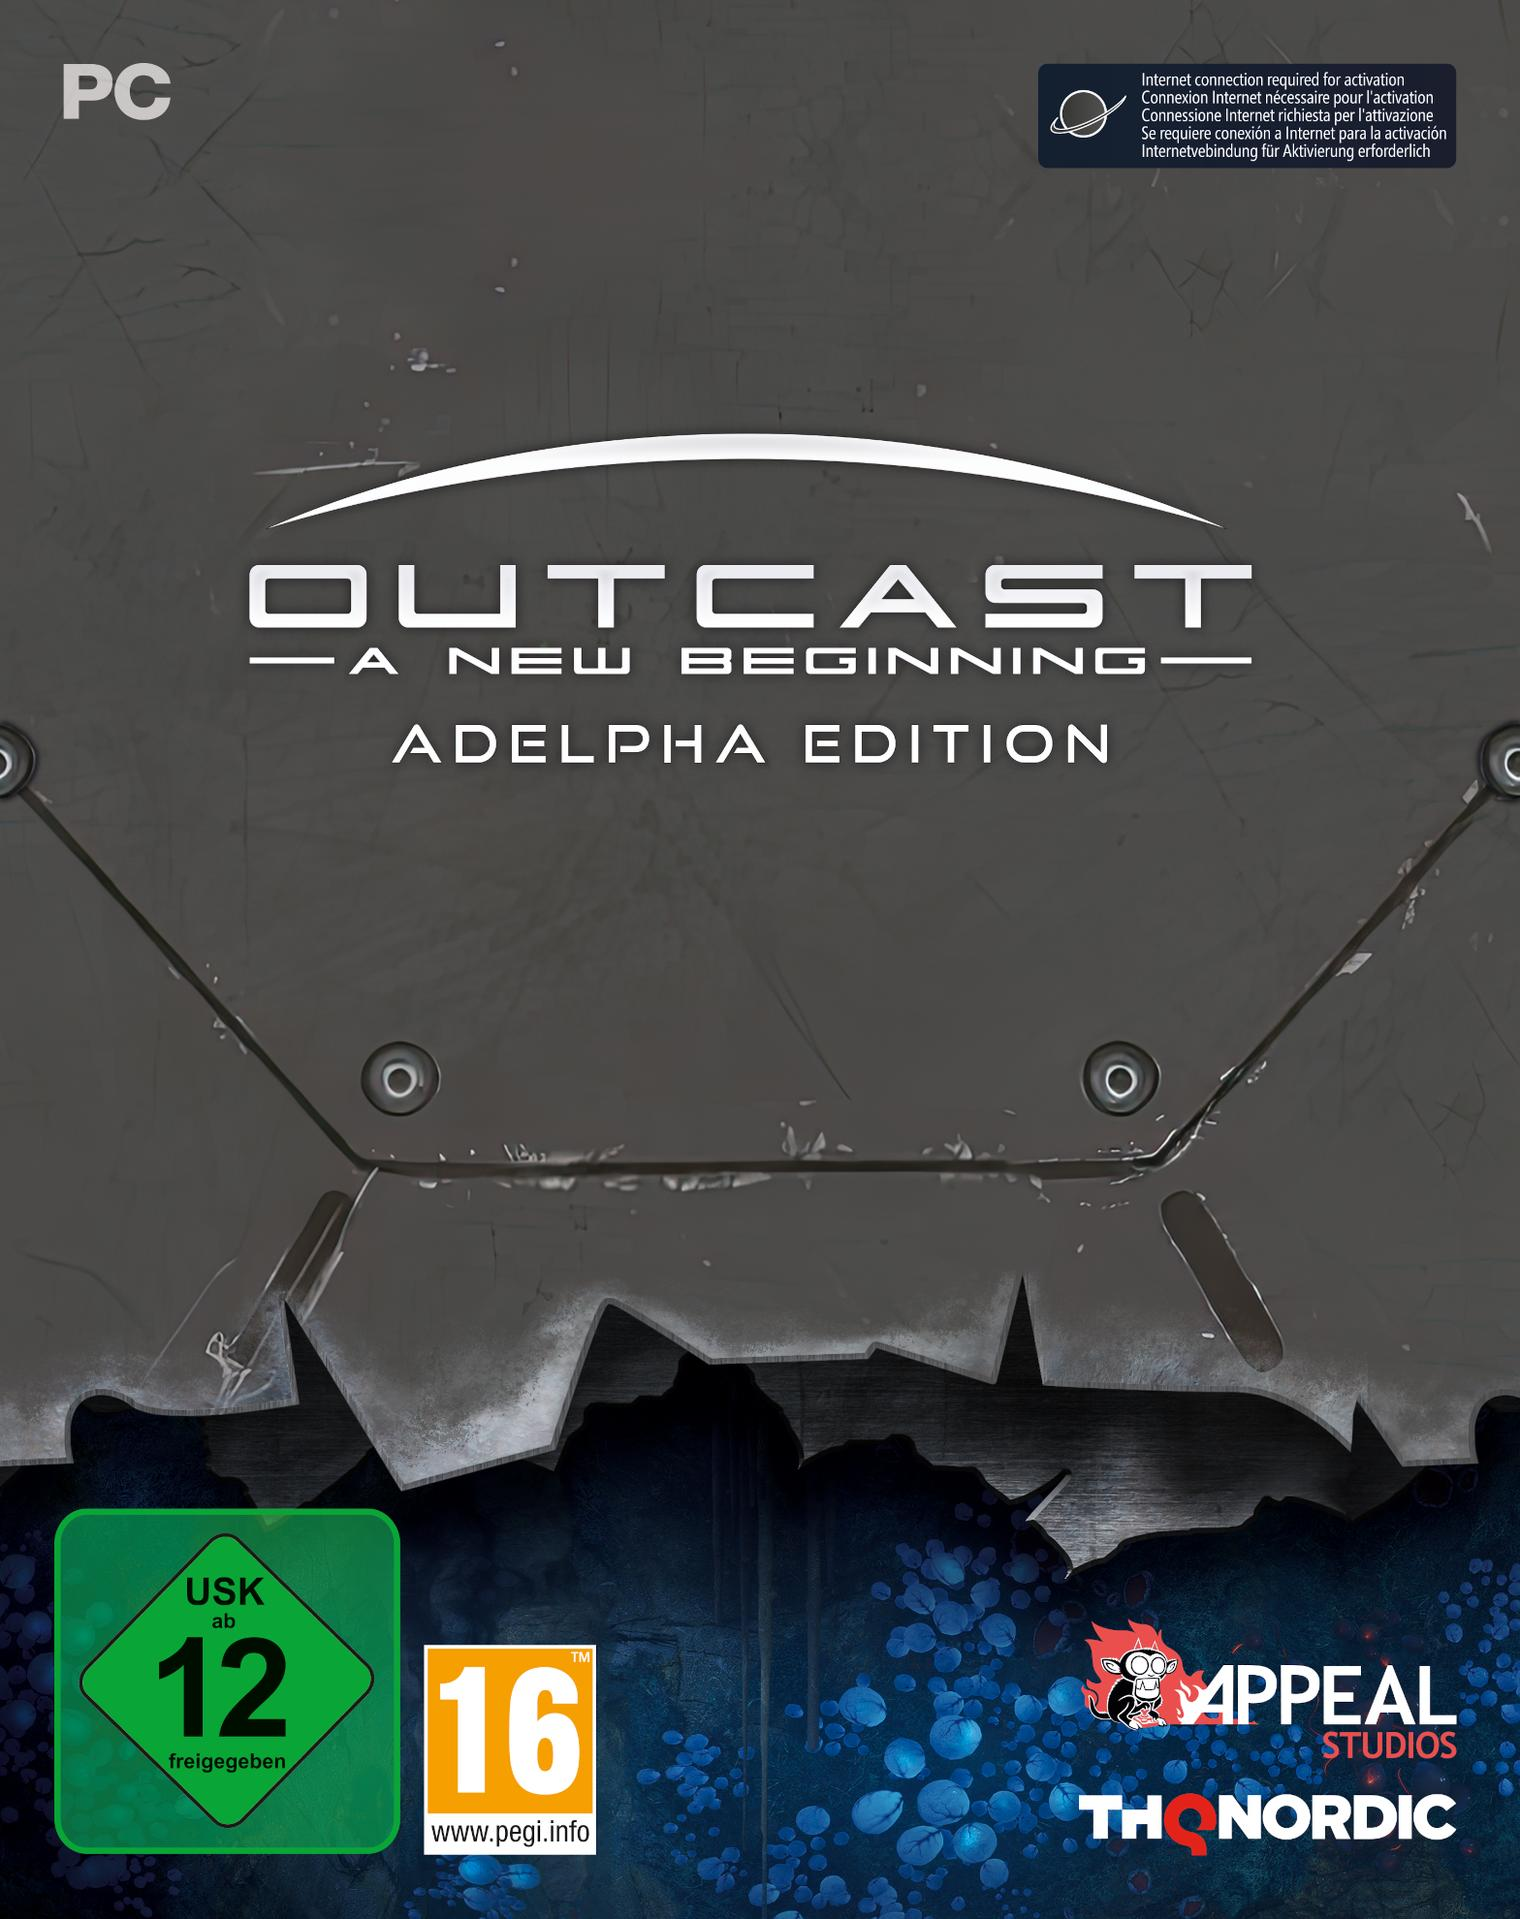 Outcast - A New Edition Adelpha - - [PC] Beginning